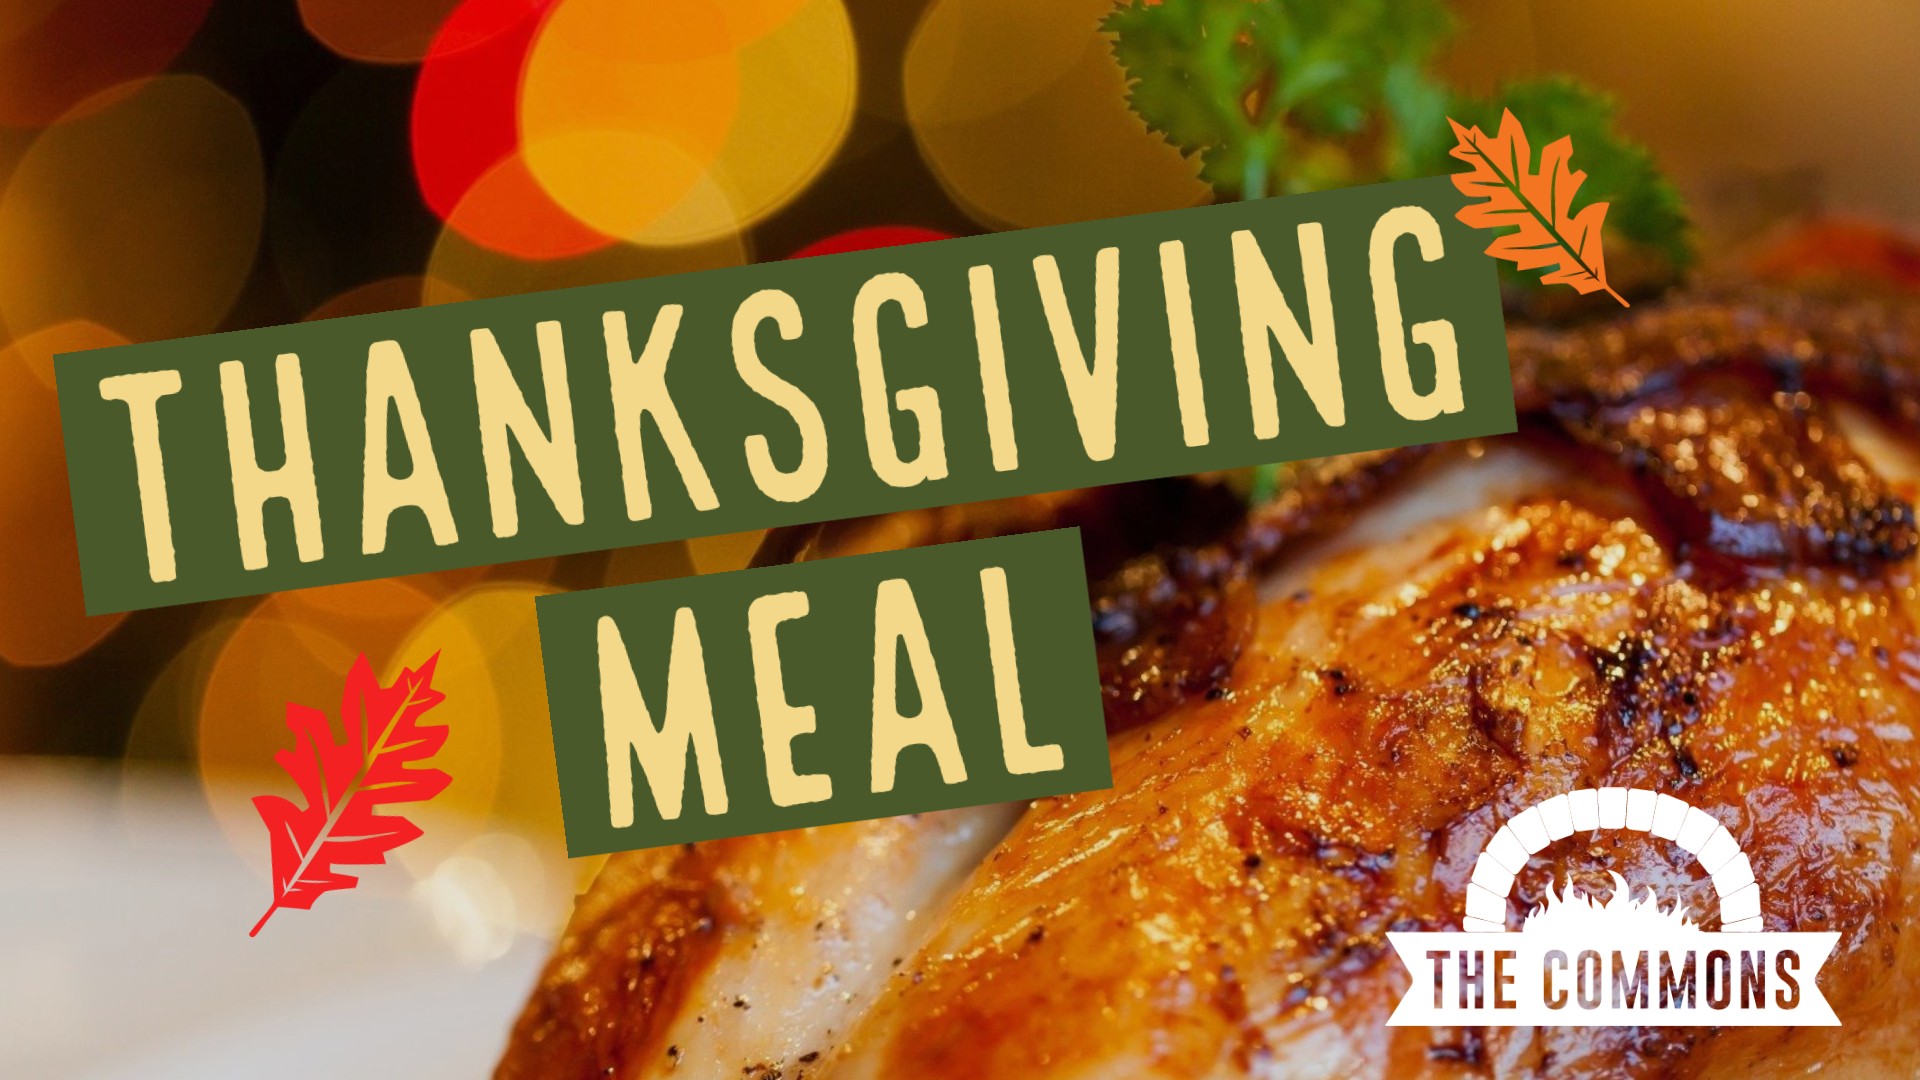 background image of turkey with "Thanksgiving Meal" and The Commons logo